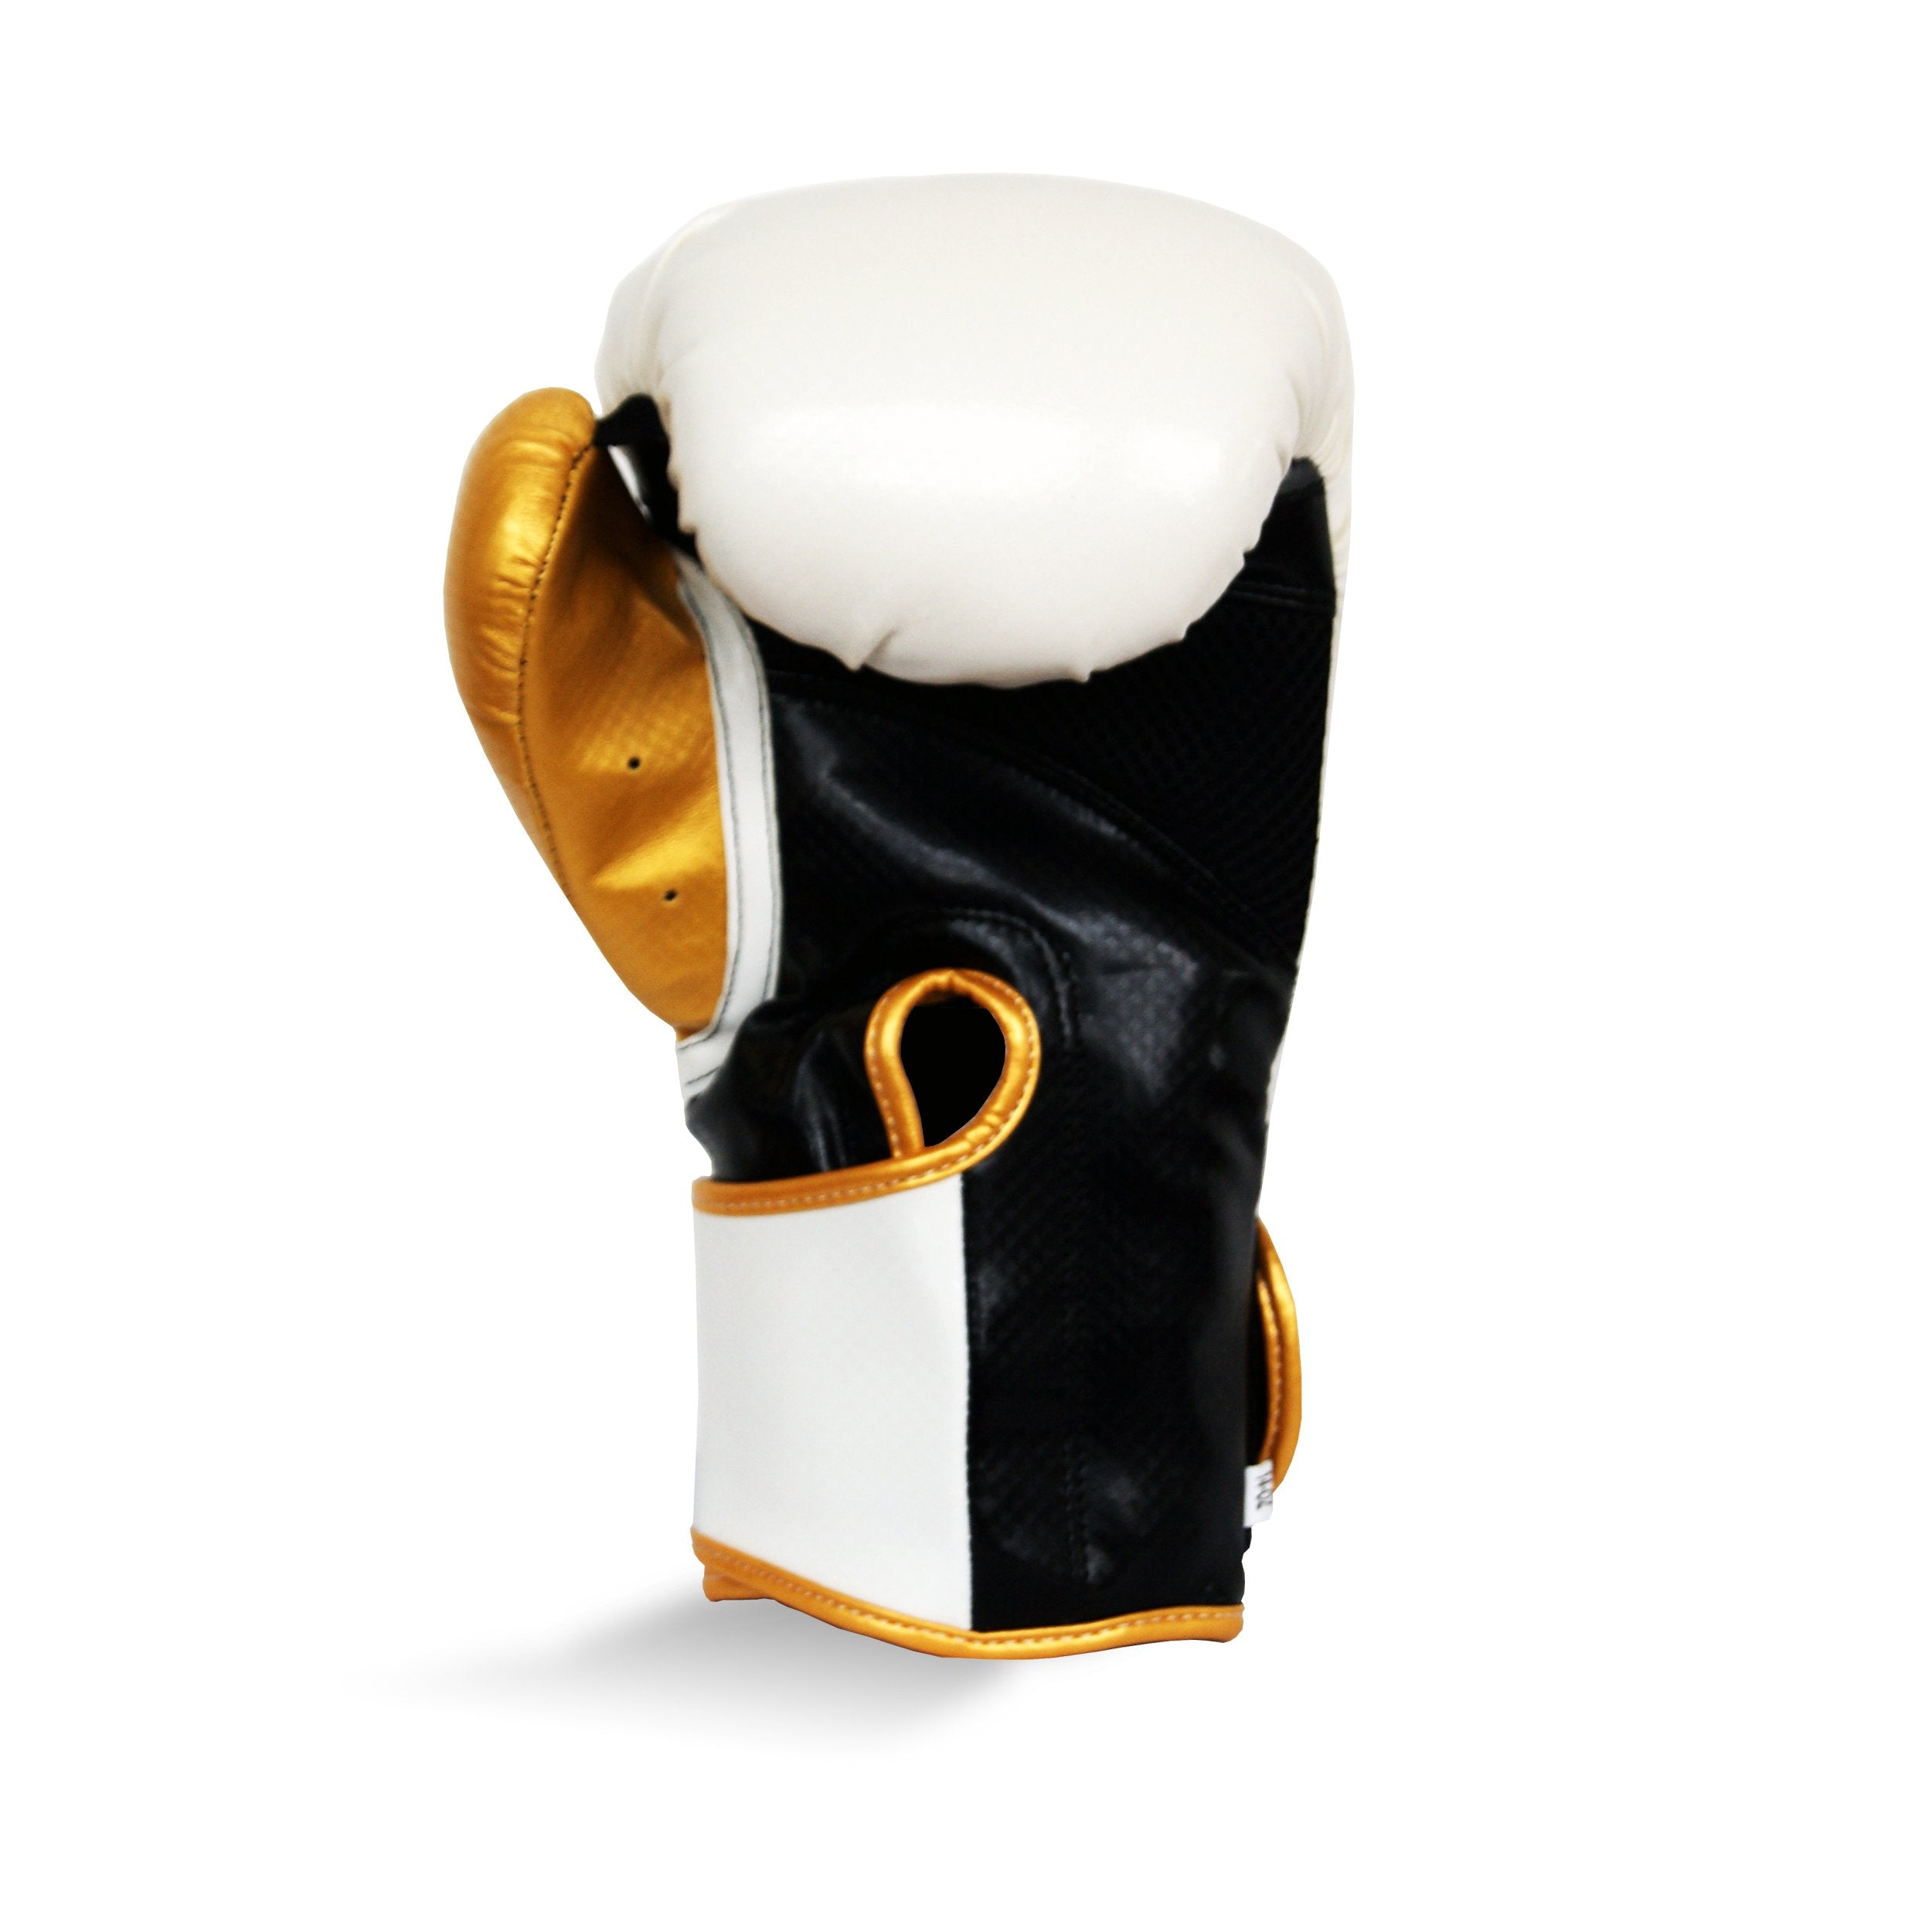 Pro Fitness Synthetic Leather Boxing Glove Metallic White / Black / Gold